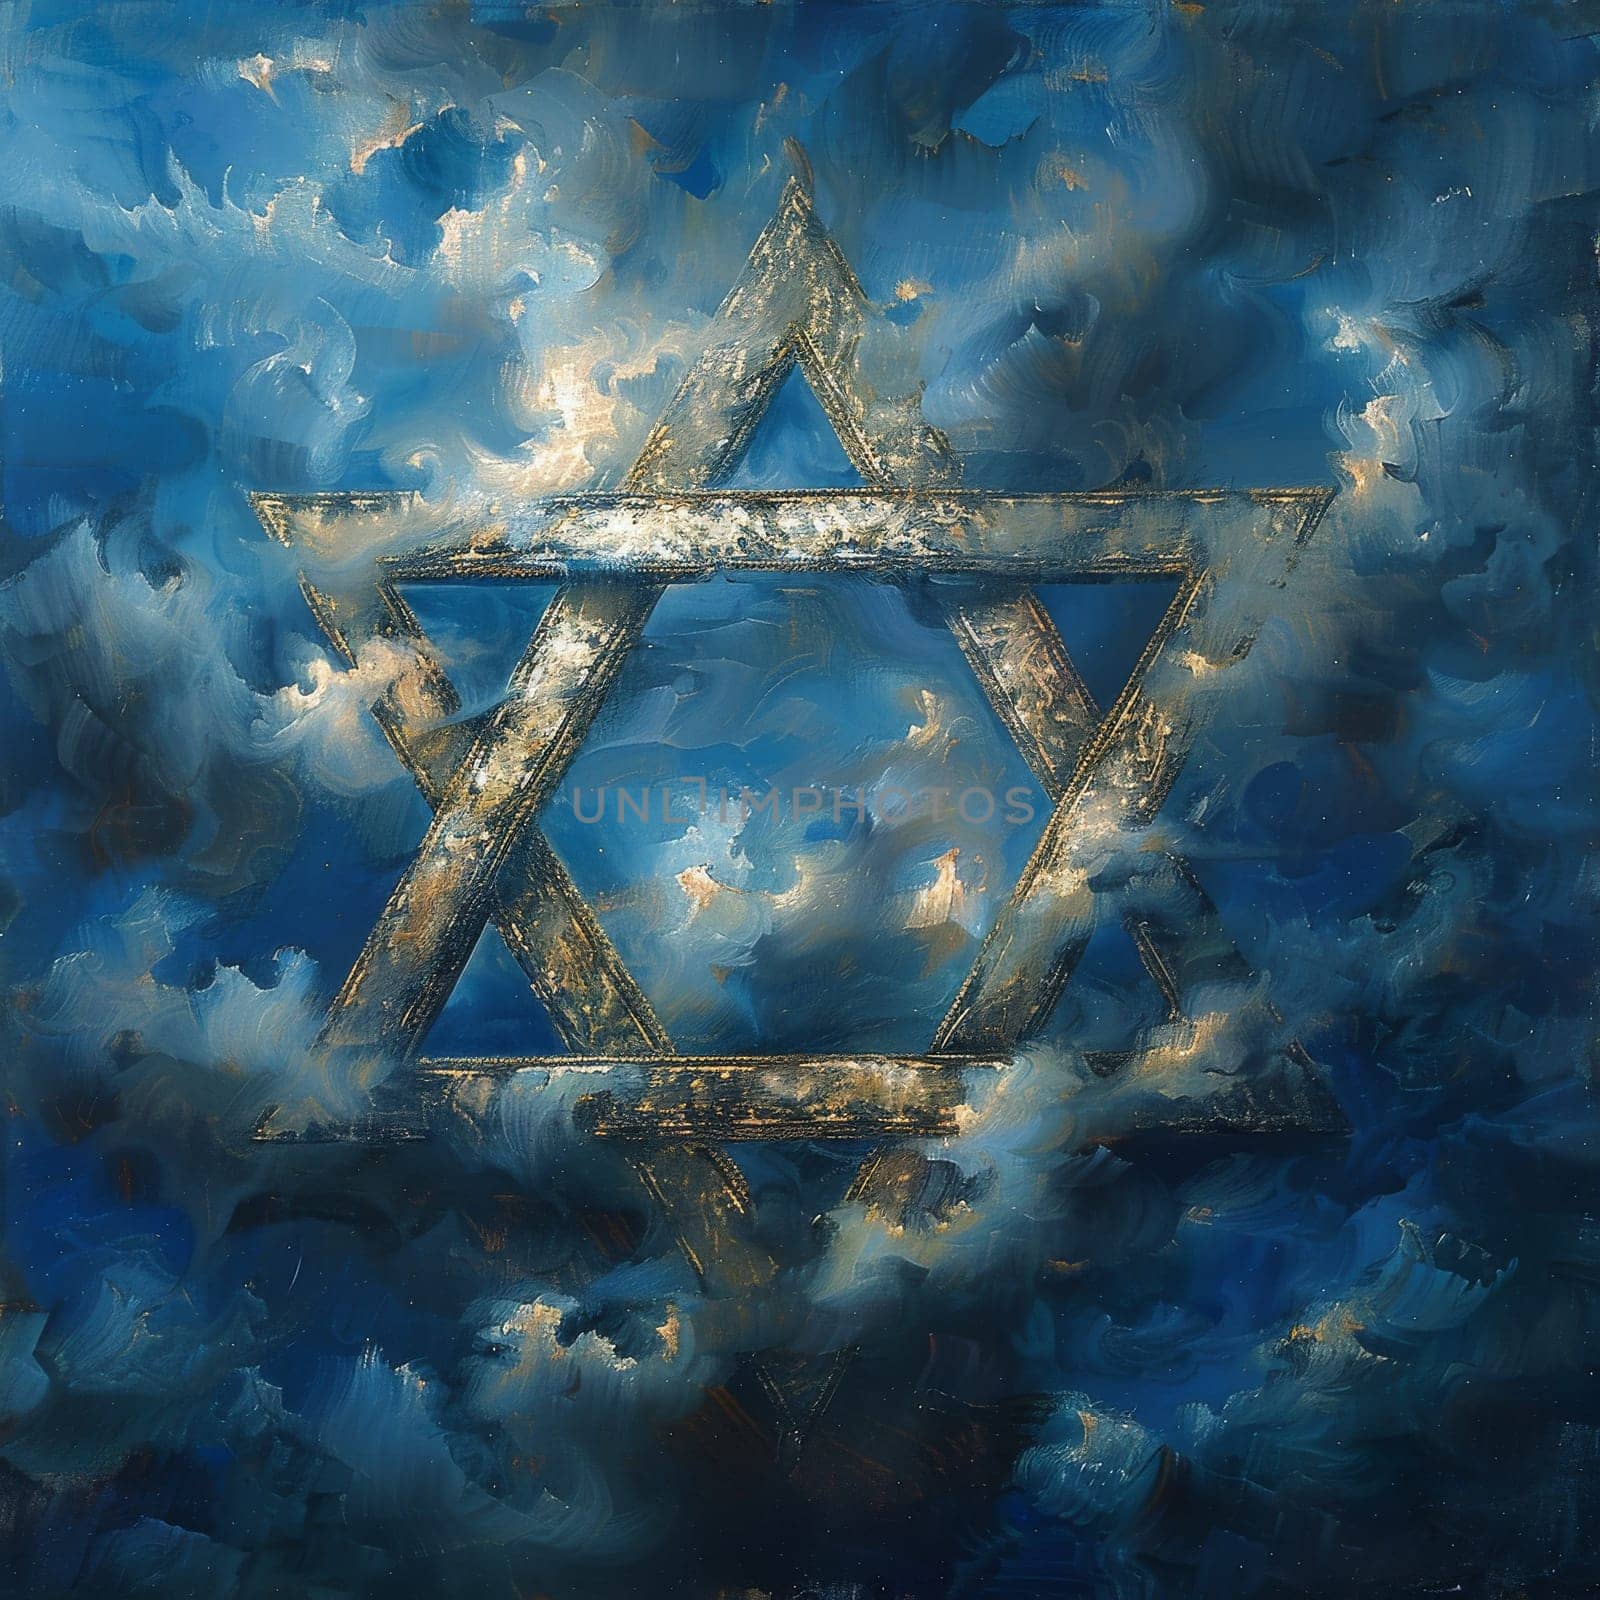 A painting of a star of david with clouds in the background. The painting is blue and gold